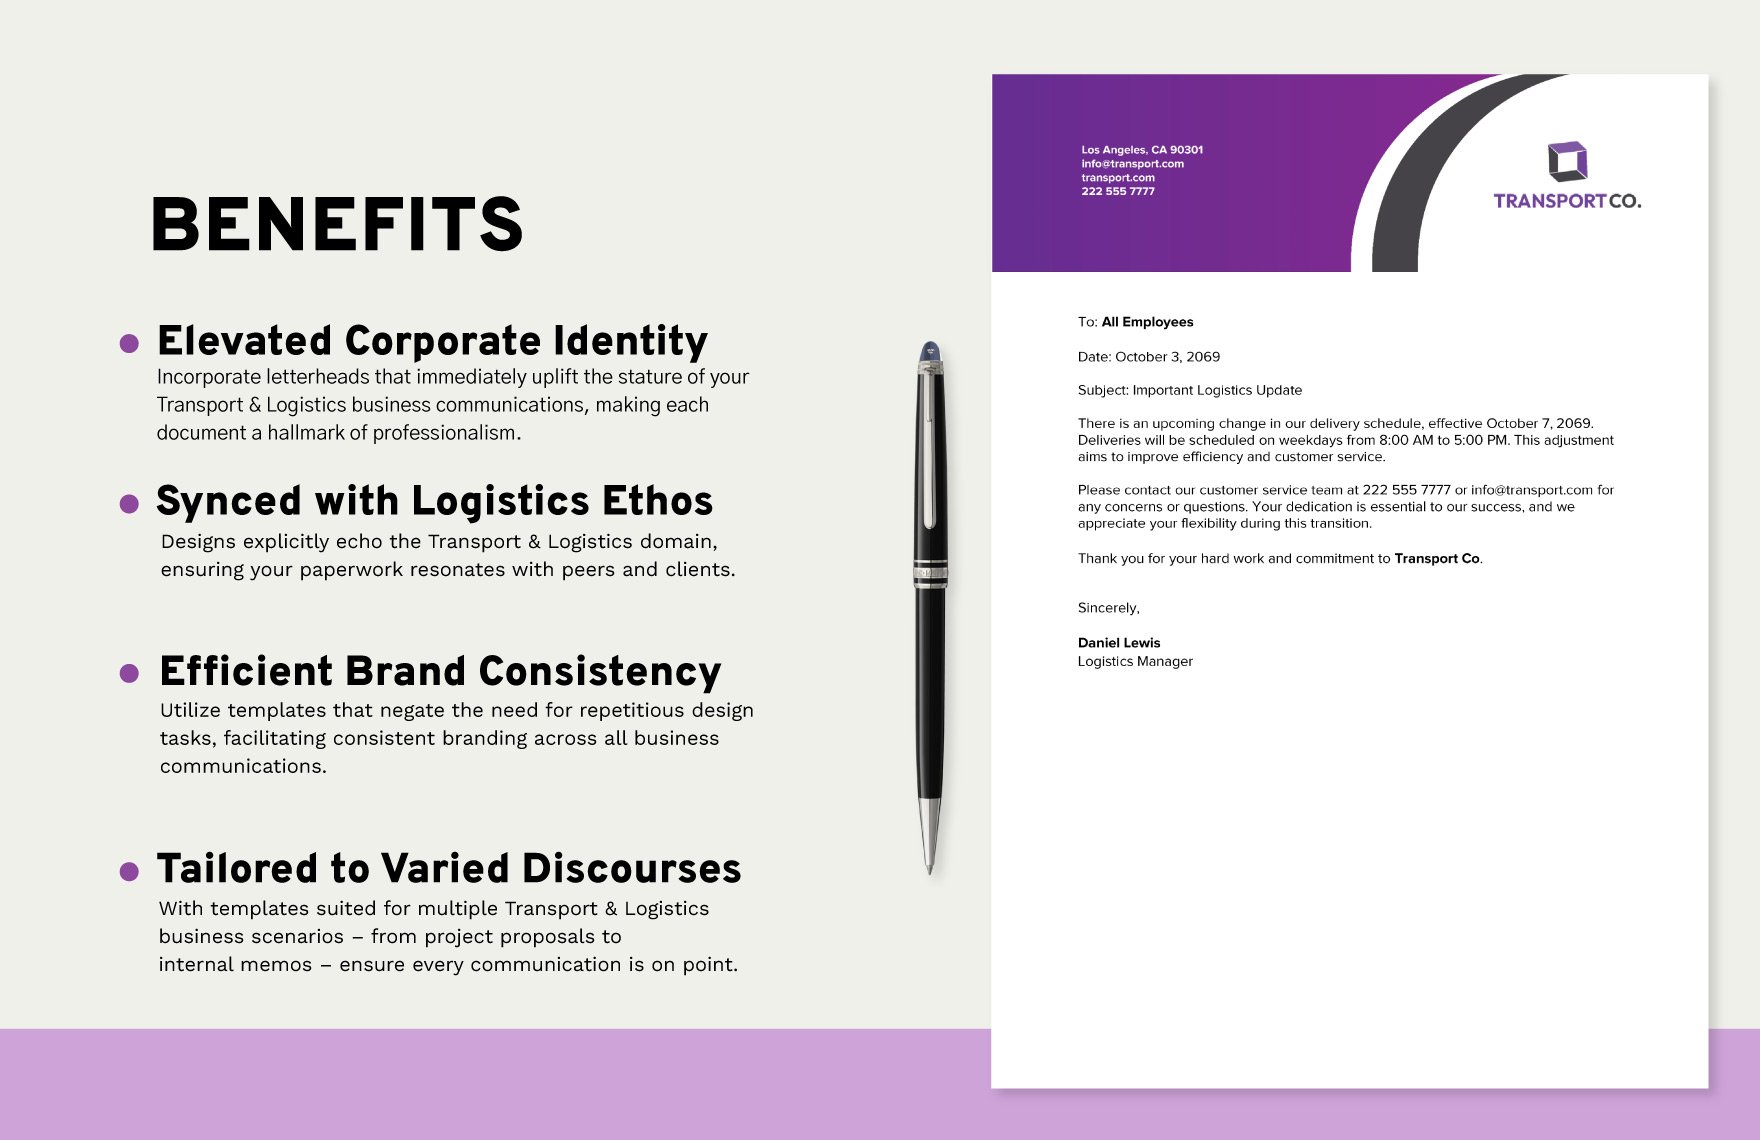 Transport and Logistics Courier and Express Delivery Letterhead Template